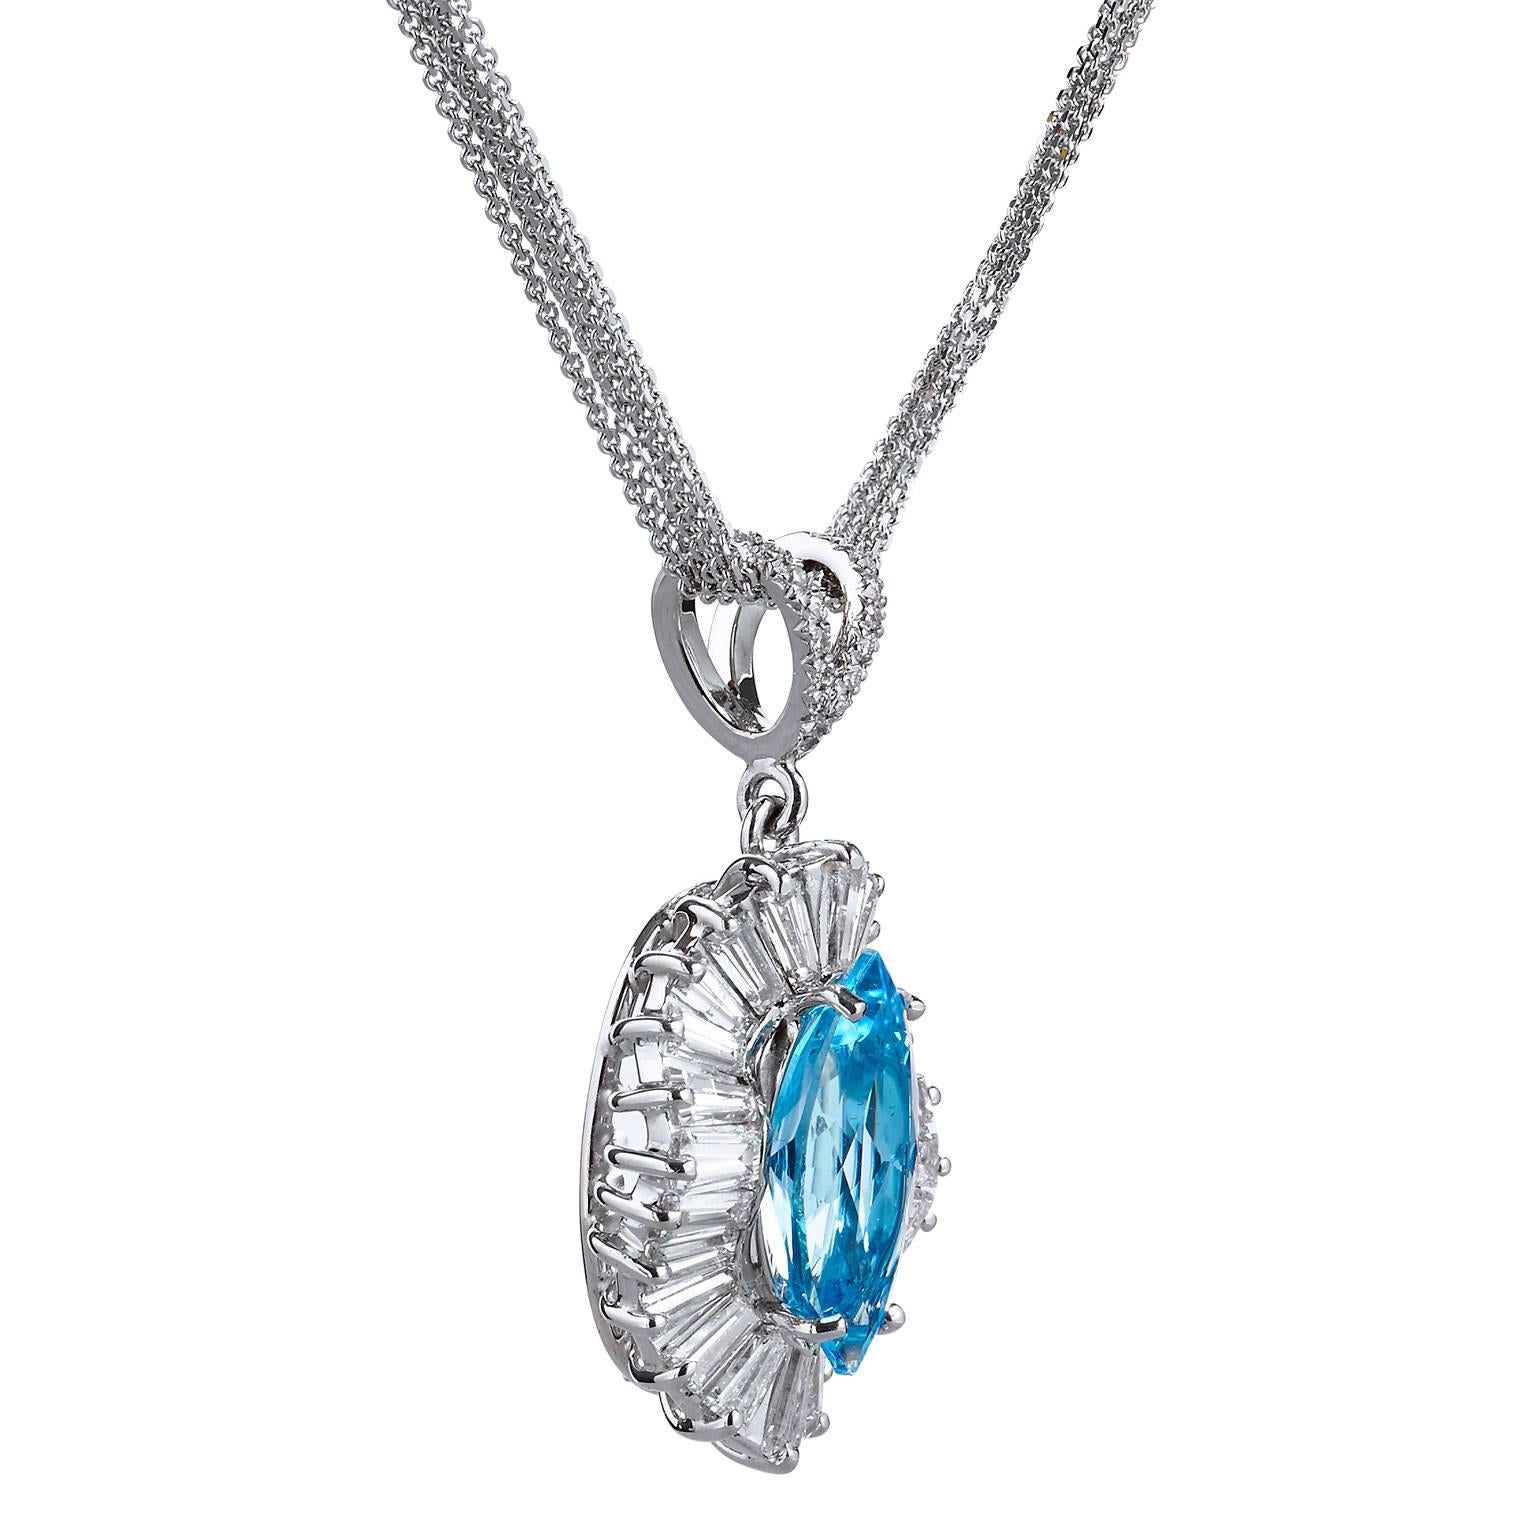 Ballerina style pendant in fourteen karat white gold, featuring a 15mm x 7mm marquise shaped blue topaz weighing approximately 3.65 carats set with four prongs, the vivid center stone is highlighted by approximately 2.50 carats of tapered baguette